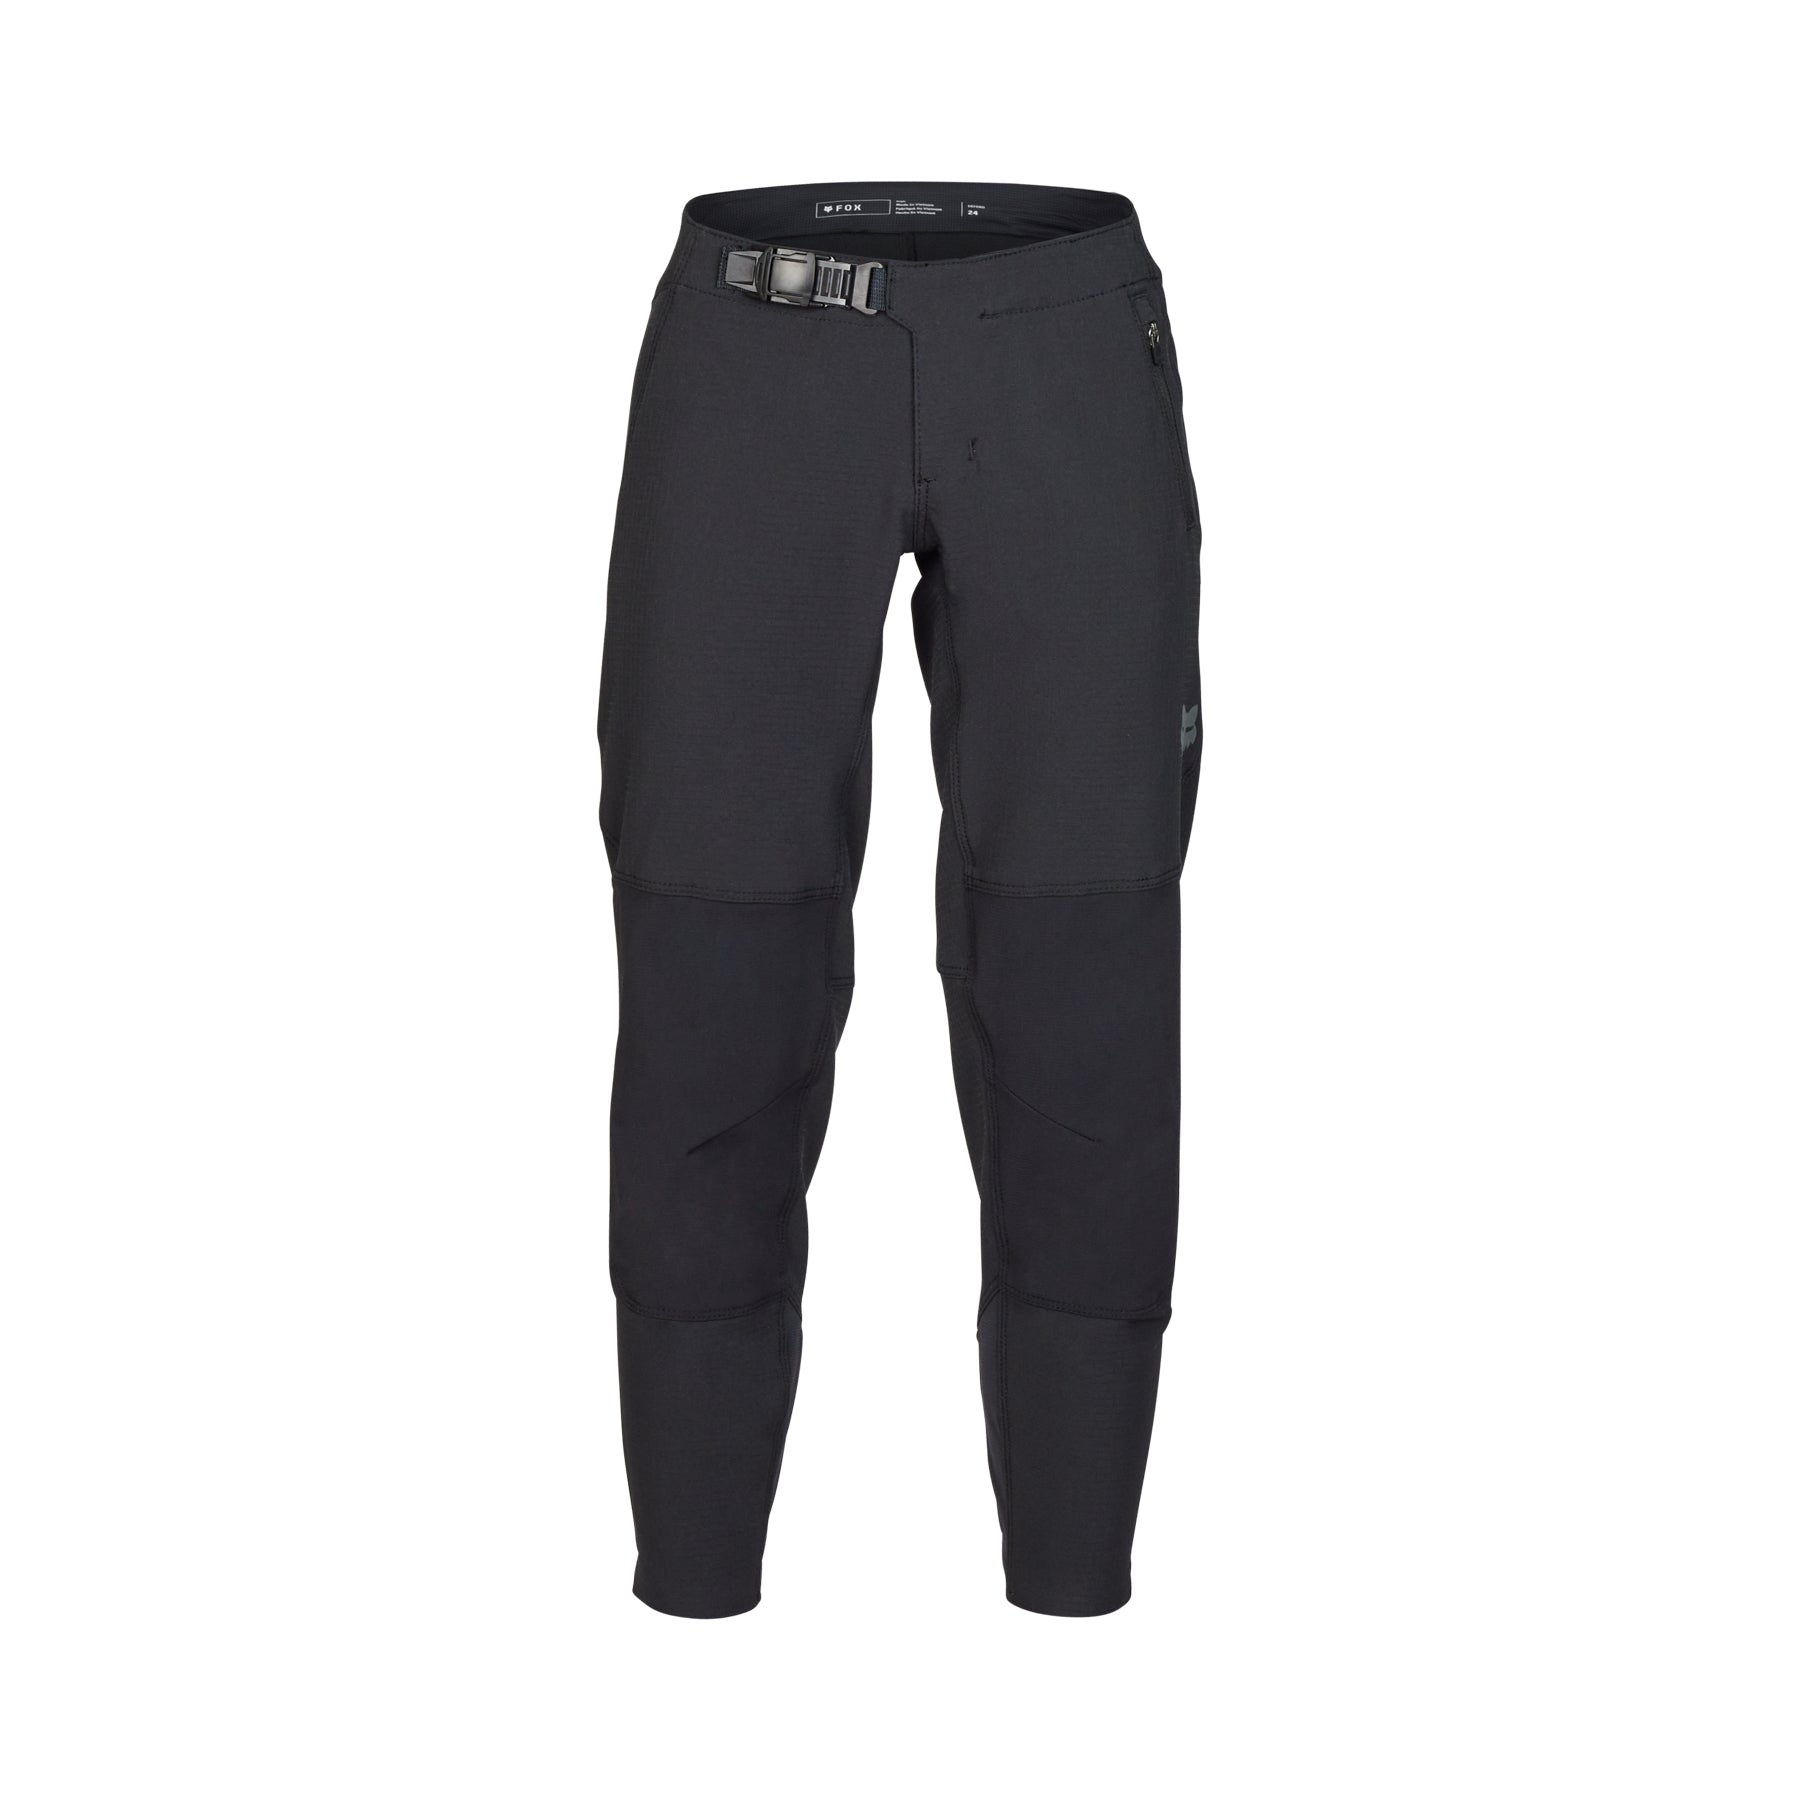 Fox Defend Youth Pants - Youth L-26 - Black - Image 1